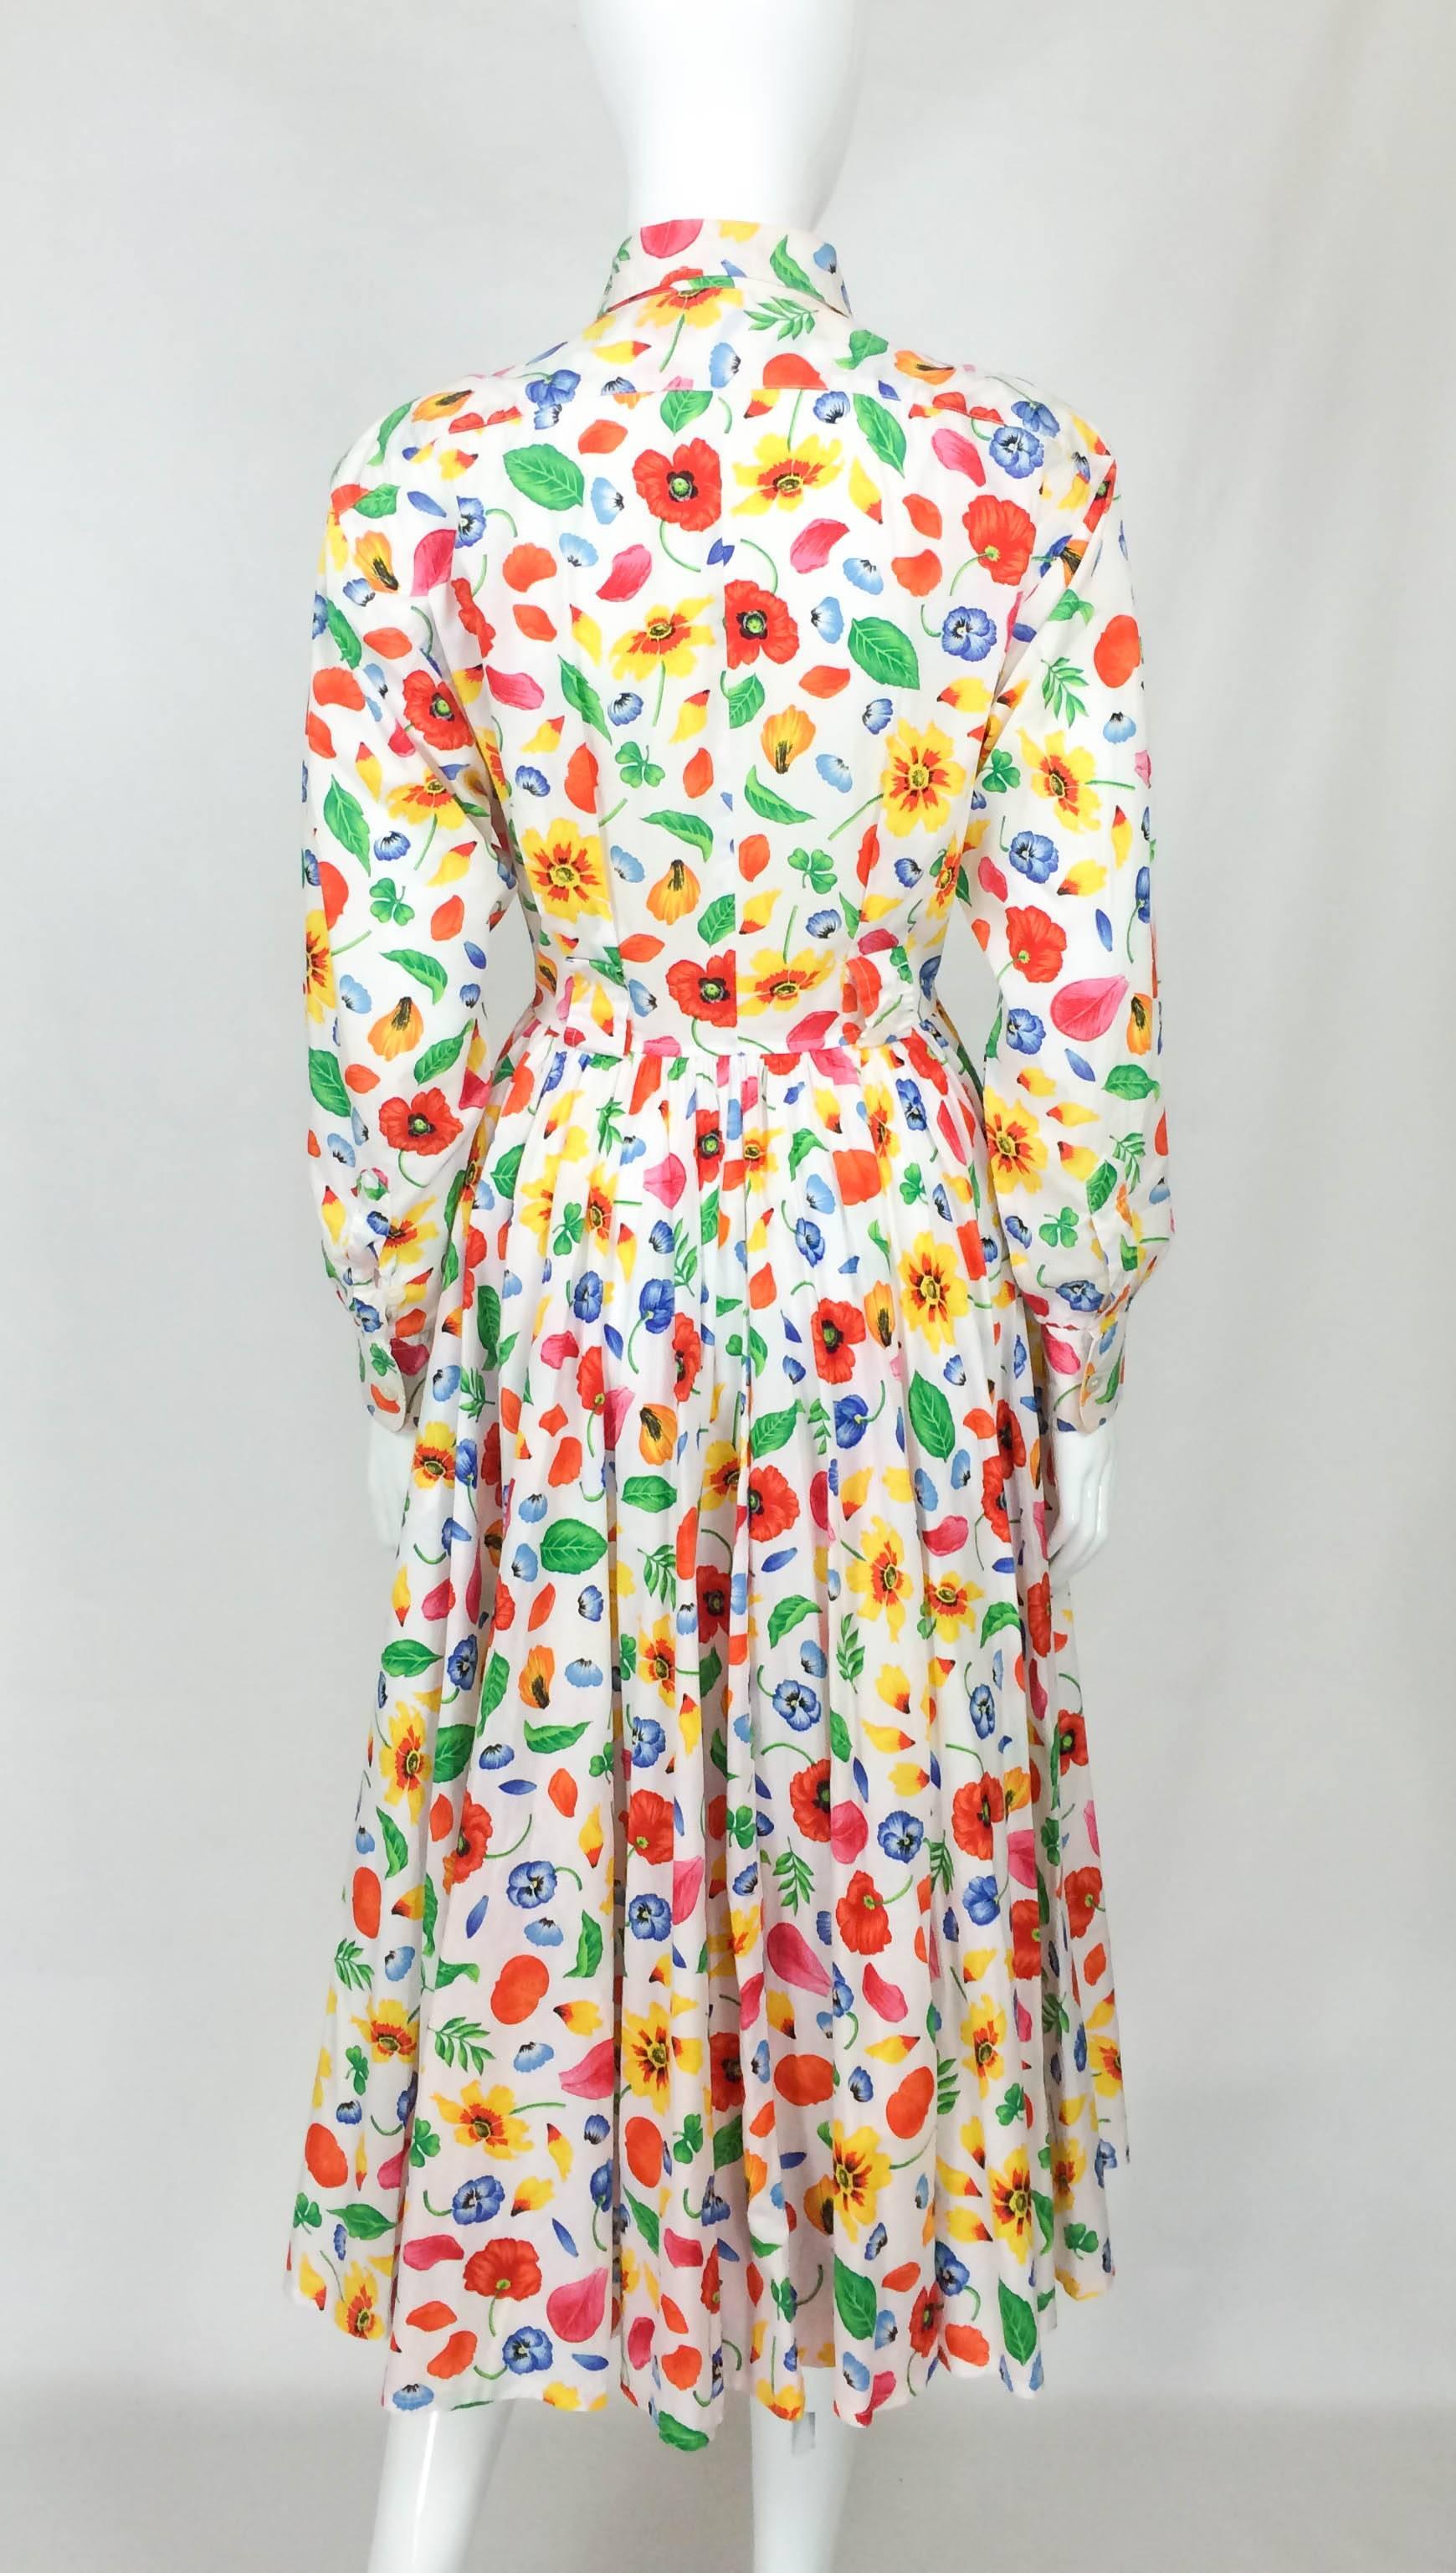 Kenzo Floral Shirt Dress - 1970s / 1980s For Sale 1